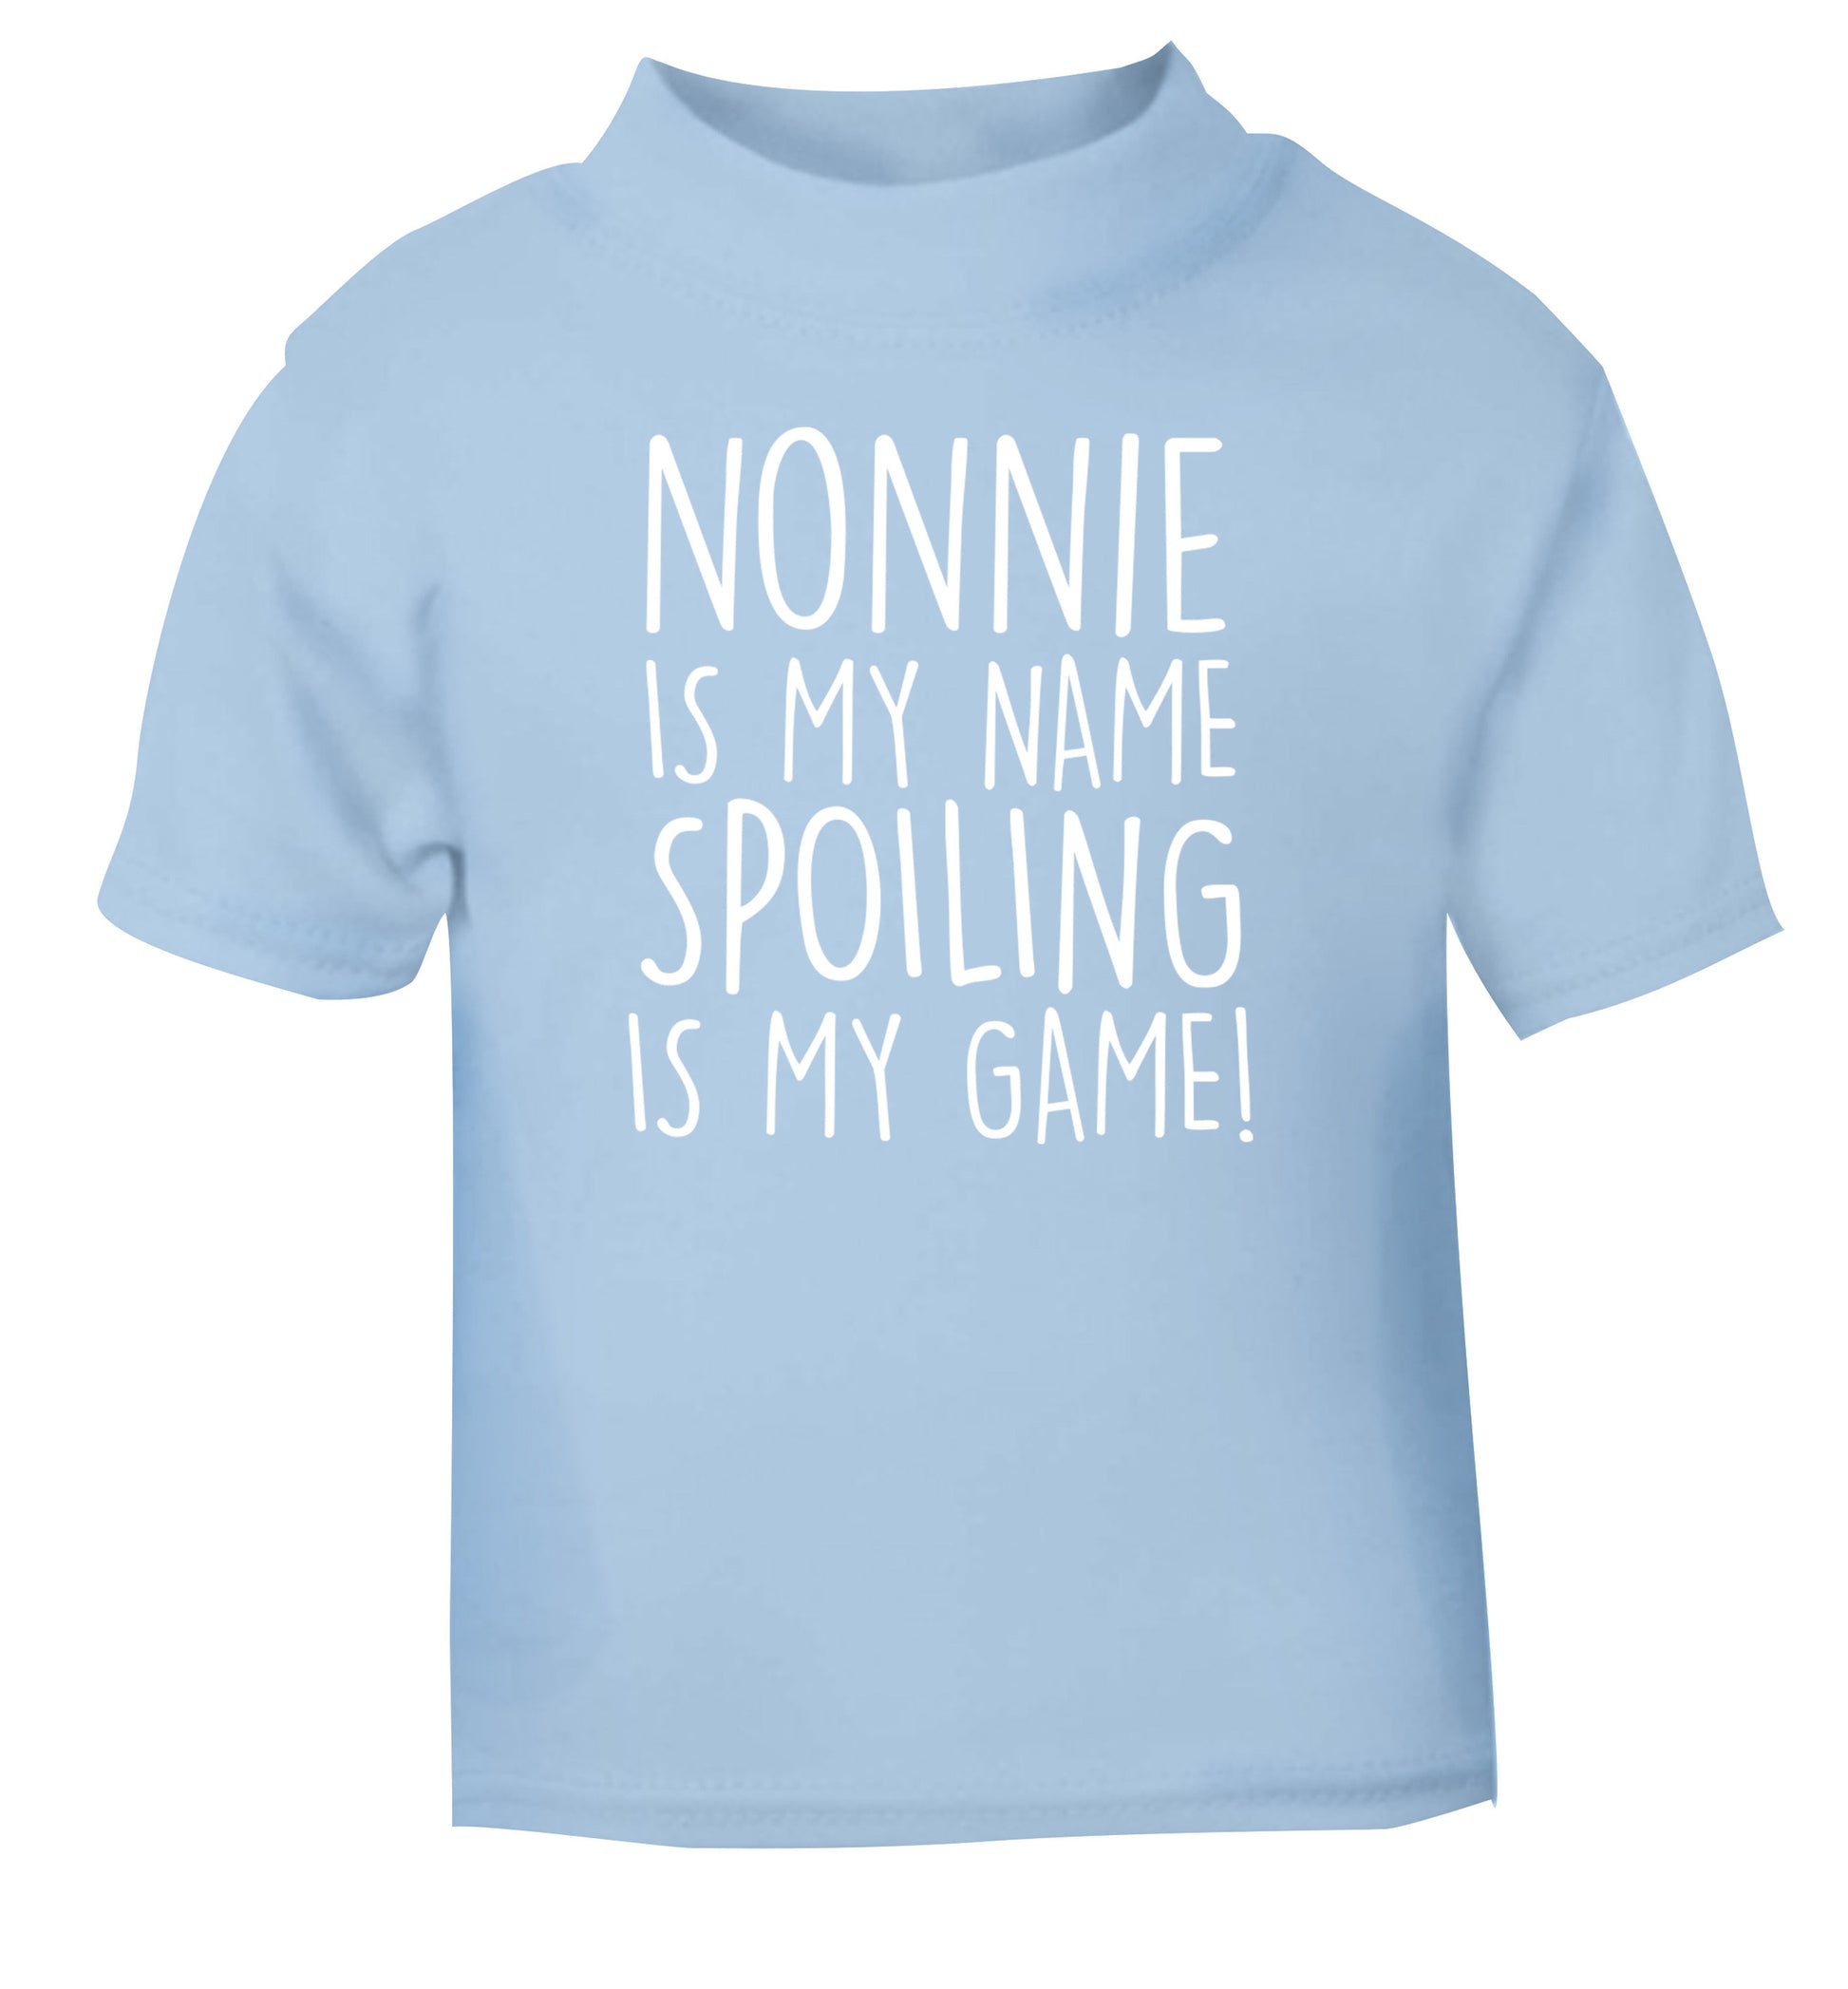 Nonnie is my name, spoiling is my game light blue Baby Toddler Tshirt 2 Years